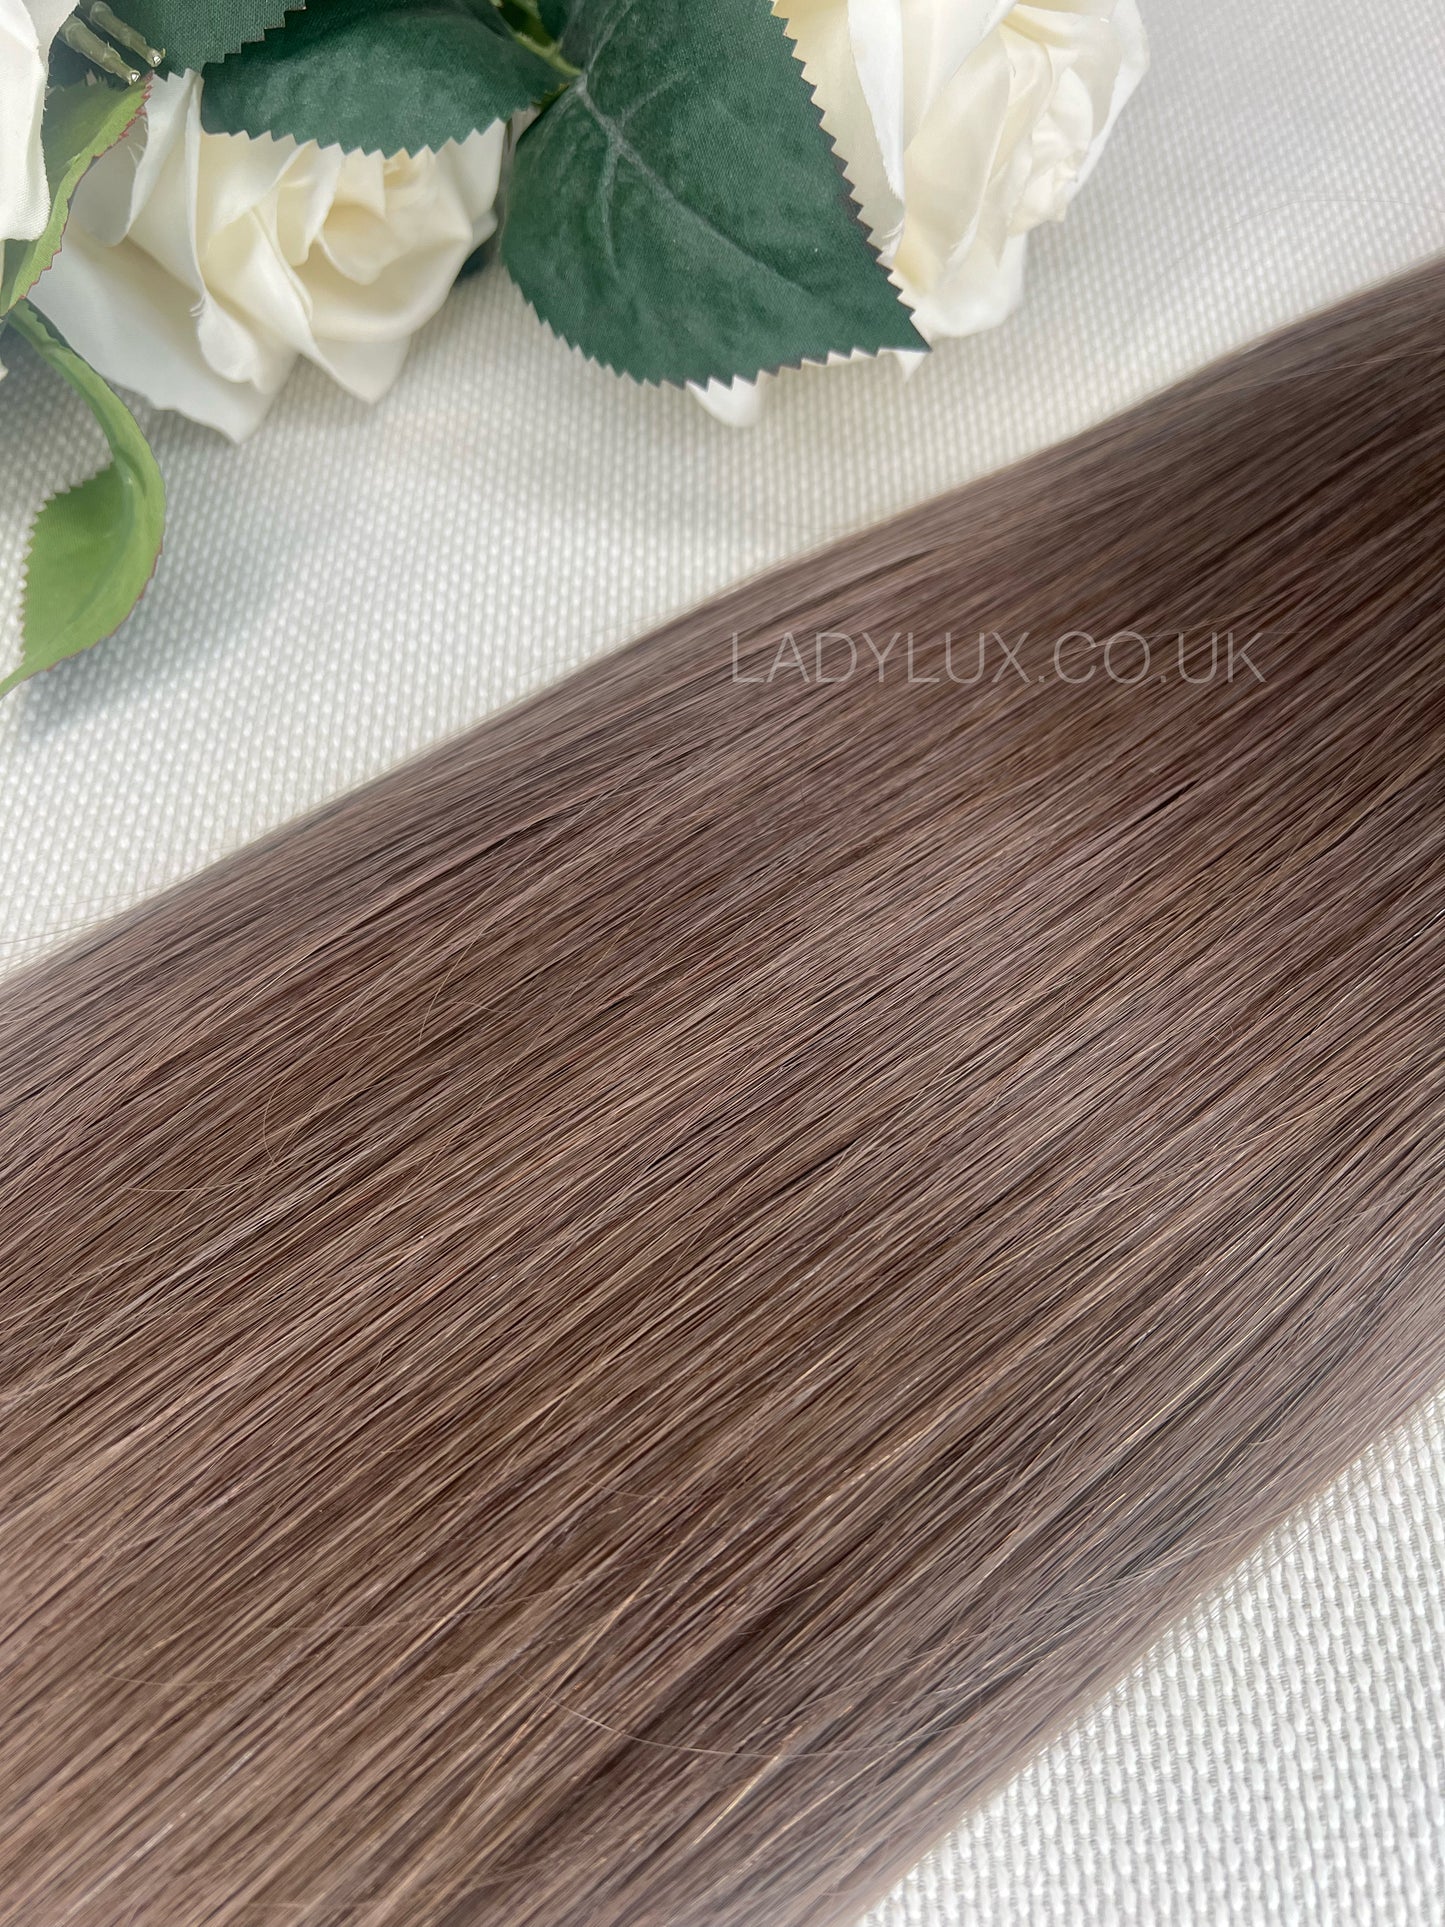 20" Deluxe 200g Human Hair Extensions Shade - Ash Brown - Ladylux